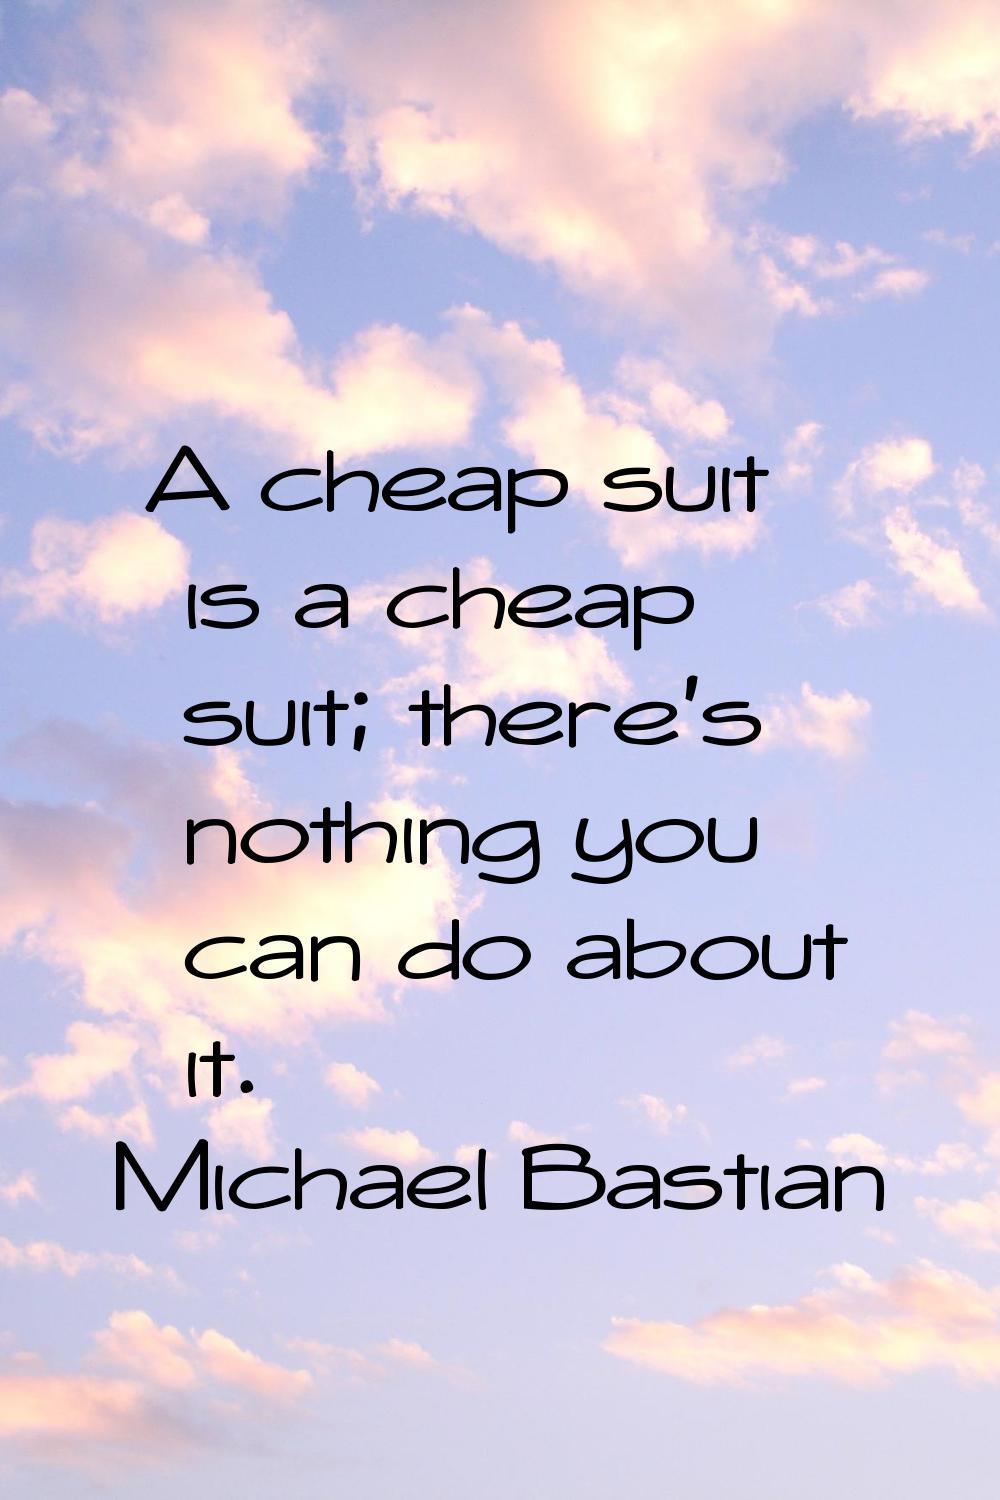 A cheap suit is a cheap suit; there's nothing you can do about it.